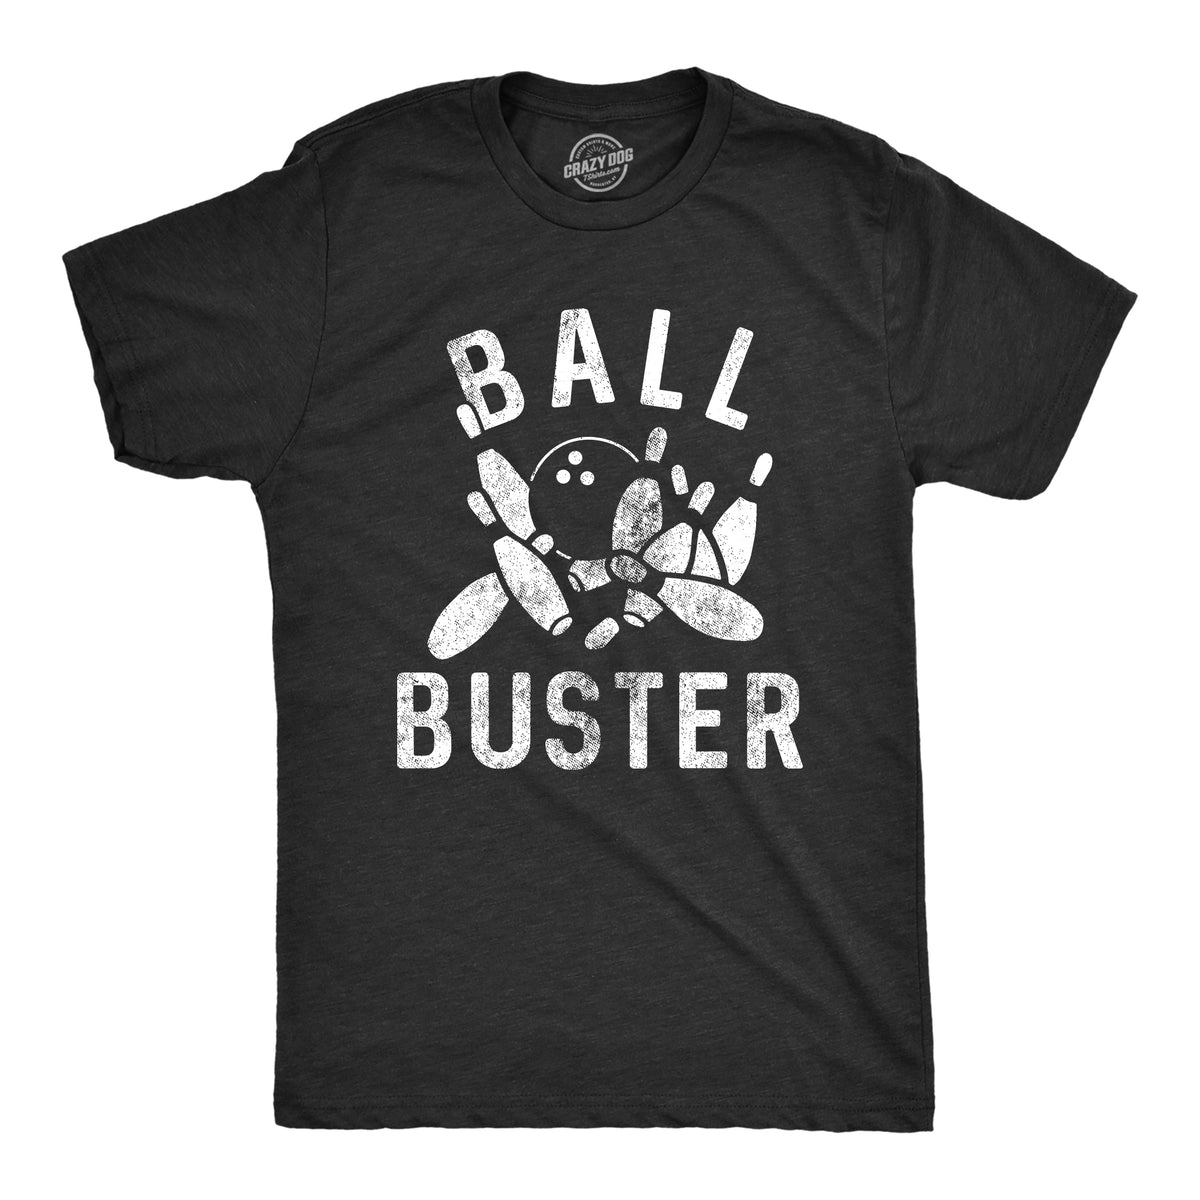 Funny Heather Black - BUSTER Ball Buster Bowling Mens T Shirt Nerdy sarcastic Tee